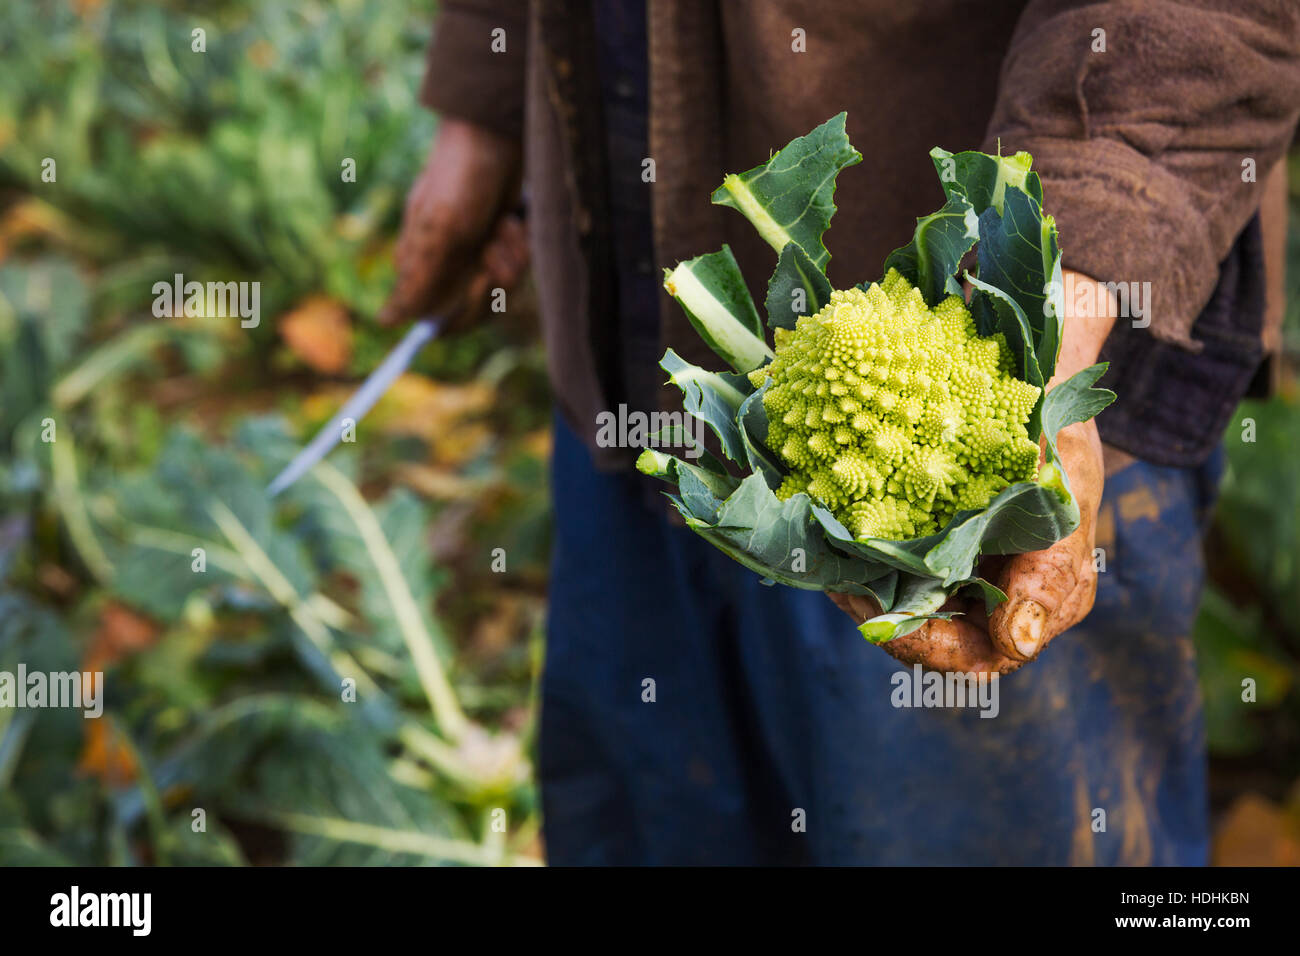 A man holding a harvested cauliflower in his hands. Stock Photo